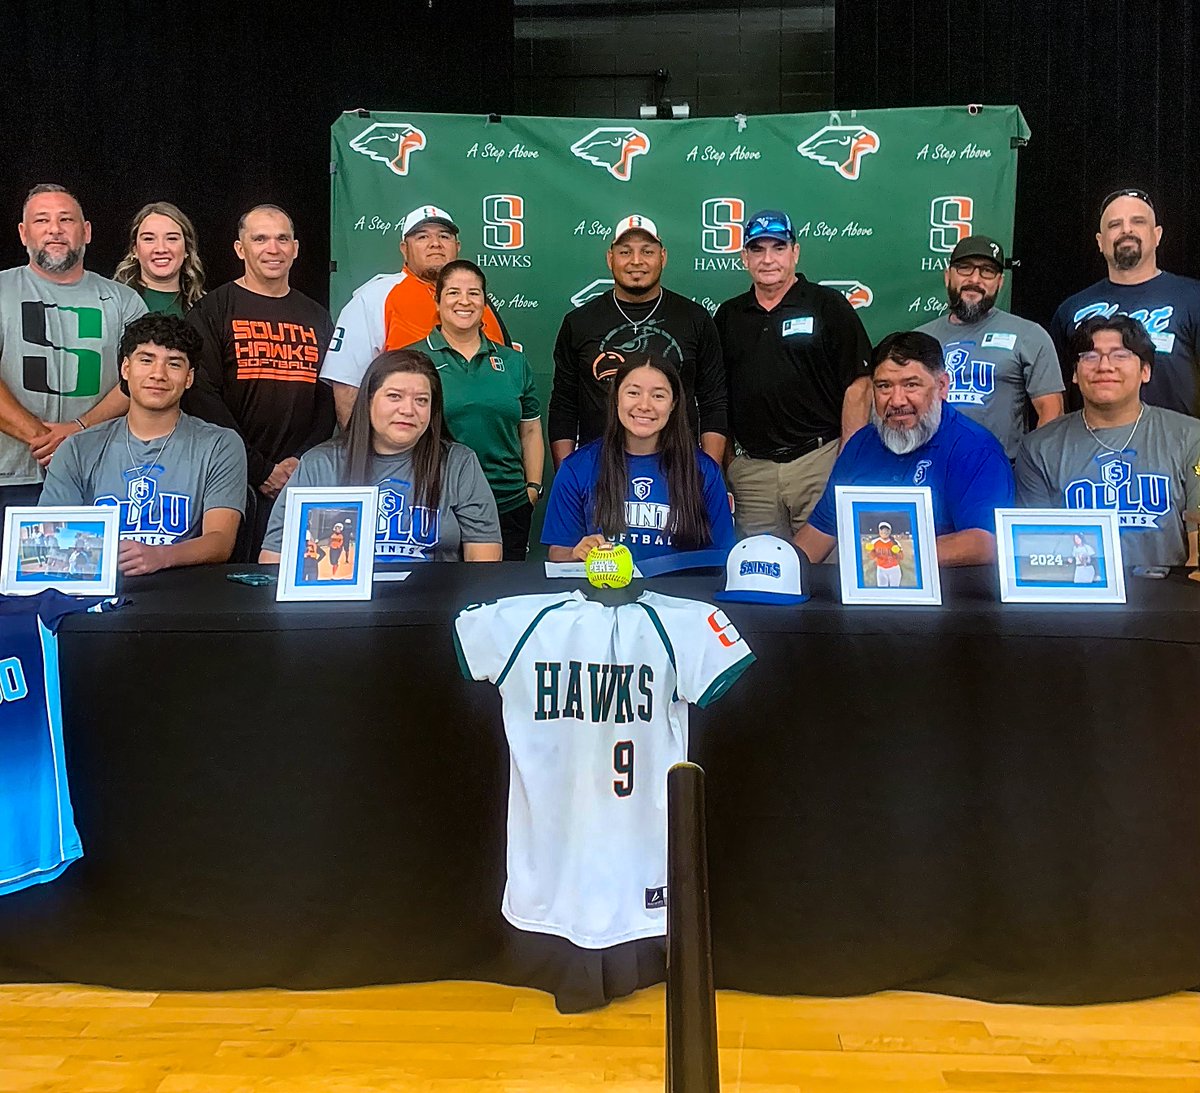 Big Congratulations to Harlingen High School South student-athlete, Yezenia Perez, who just signed her letter of intent to play softball for Our Lady of the Lake University! We wish you the best for next year!